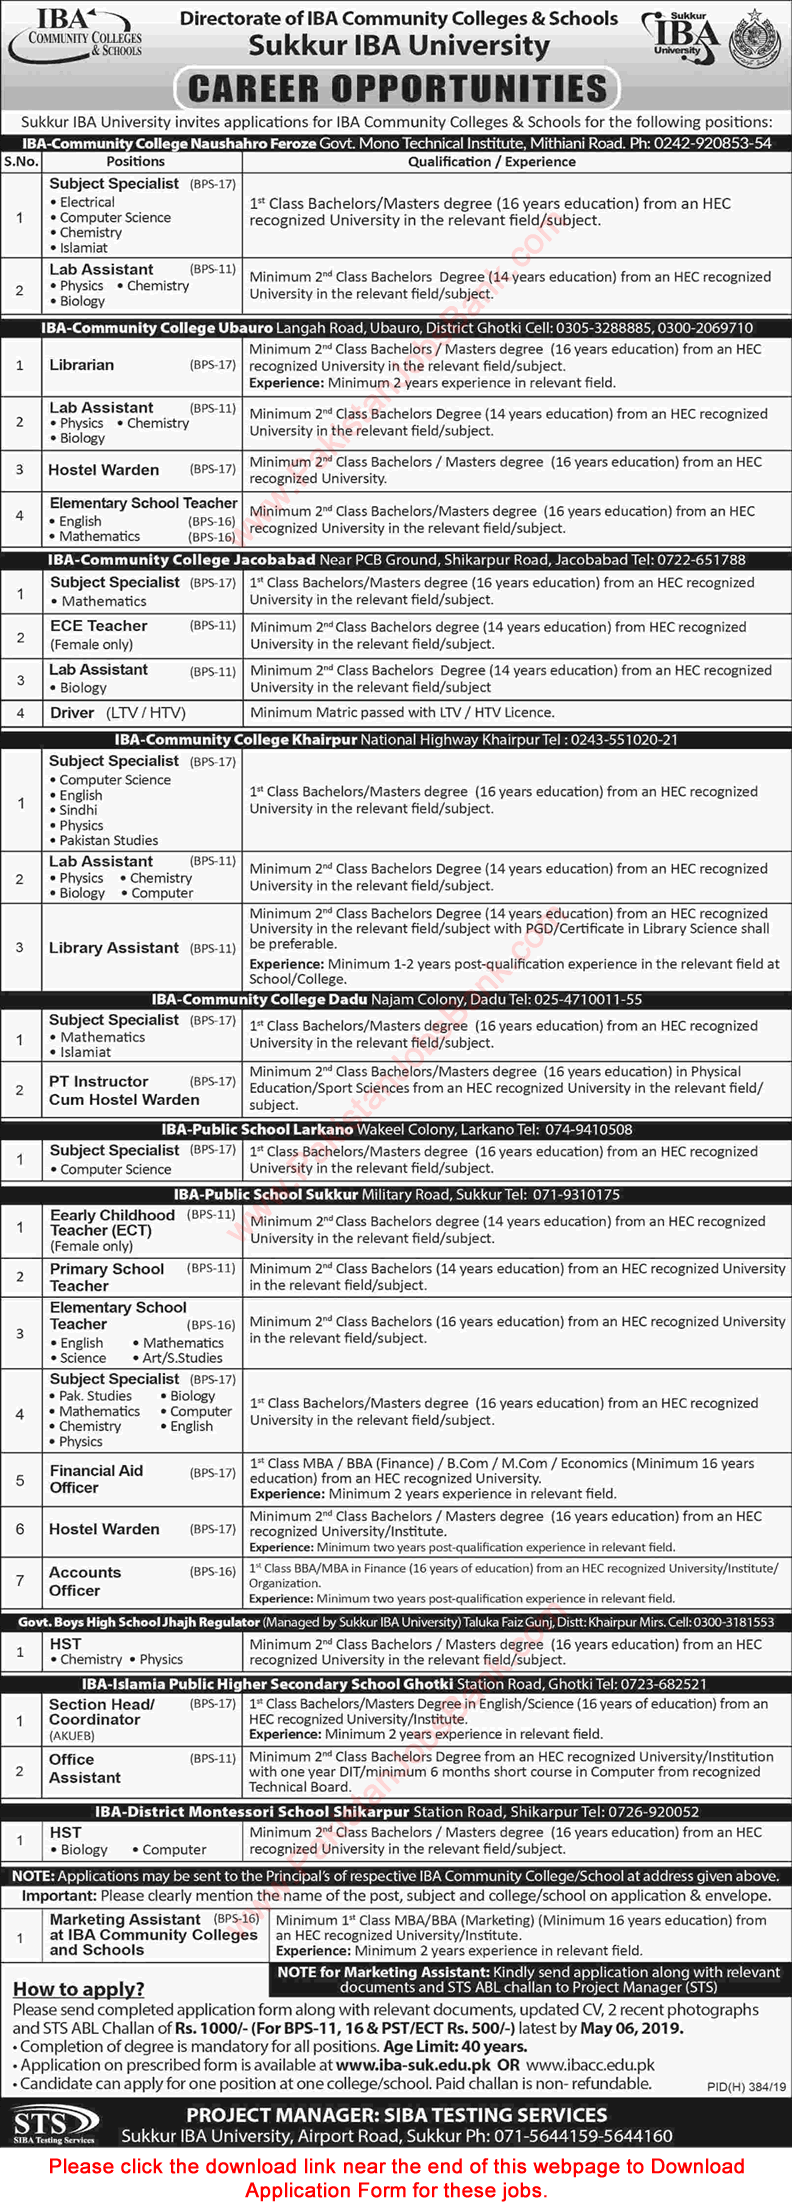 IBA Community Colleges and Schools Sindh Jobs 2019 April Application Form Sukkur IBA University Latest